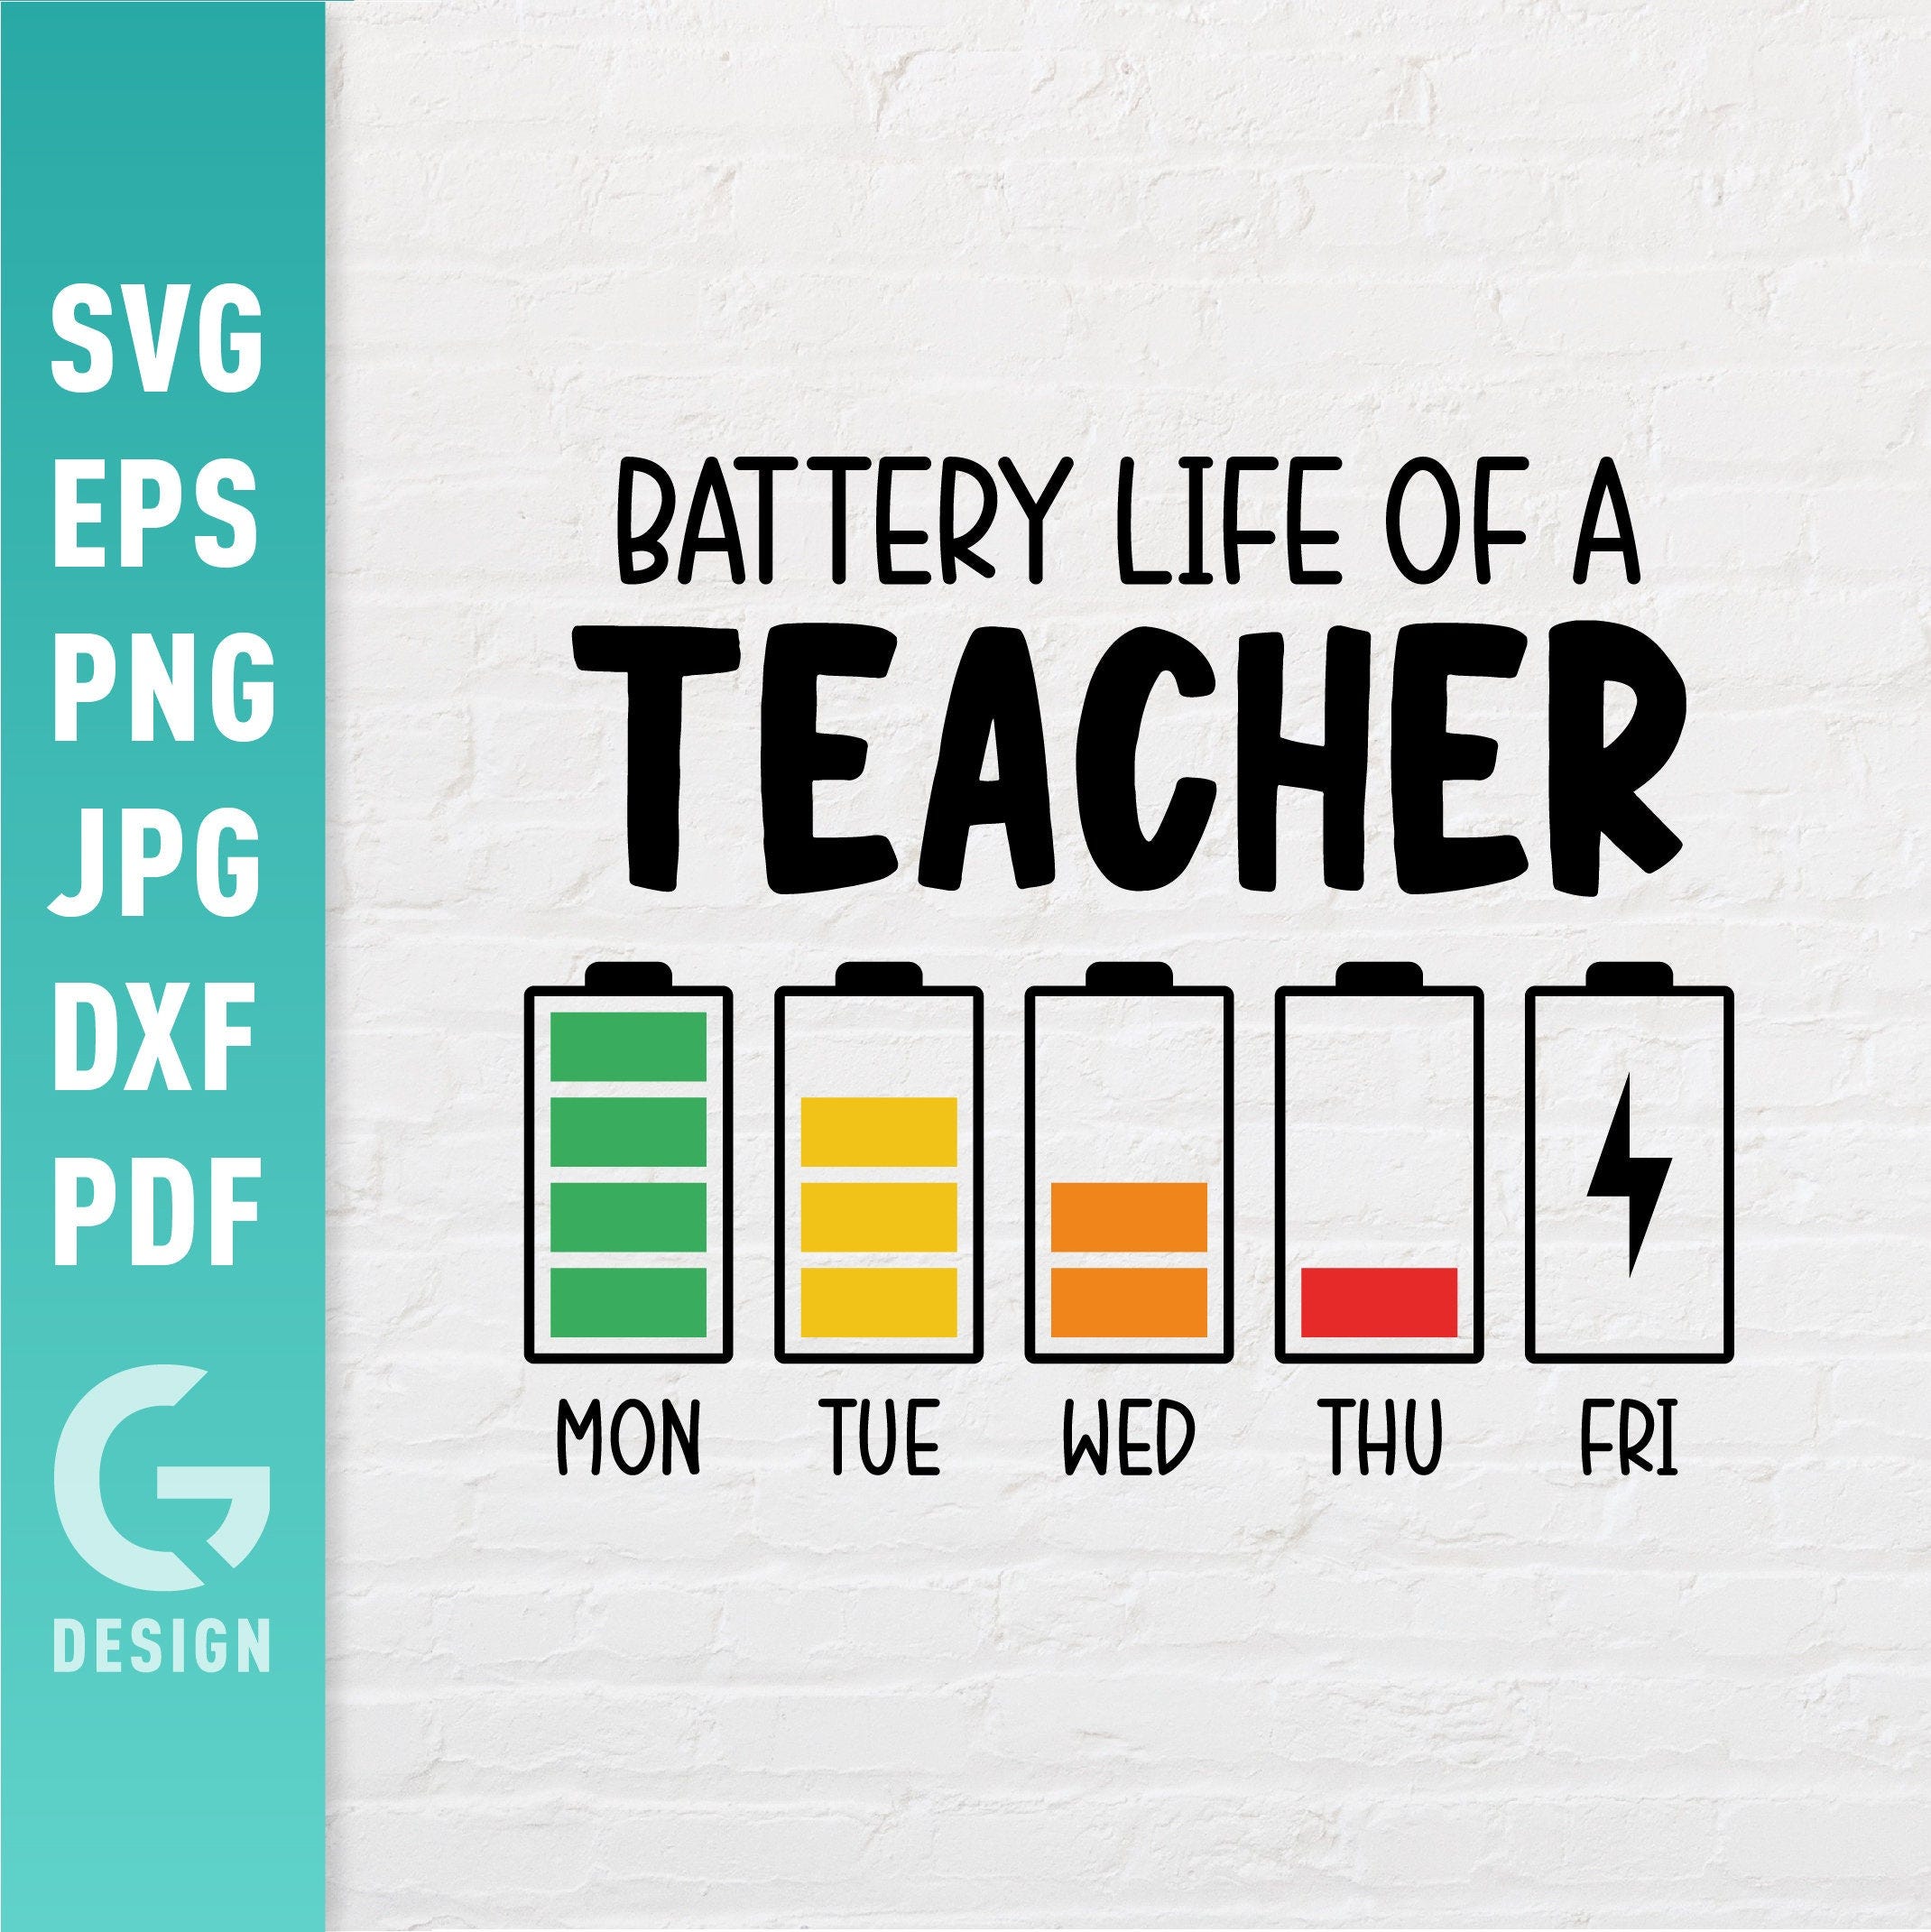 Battery Life Of A Teacher SVG | Classroom Funny Sayings | Teaching Energy School Highschool Fun Quotes Easy Cut Files for Cricut Silhouette